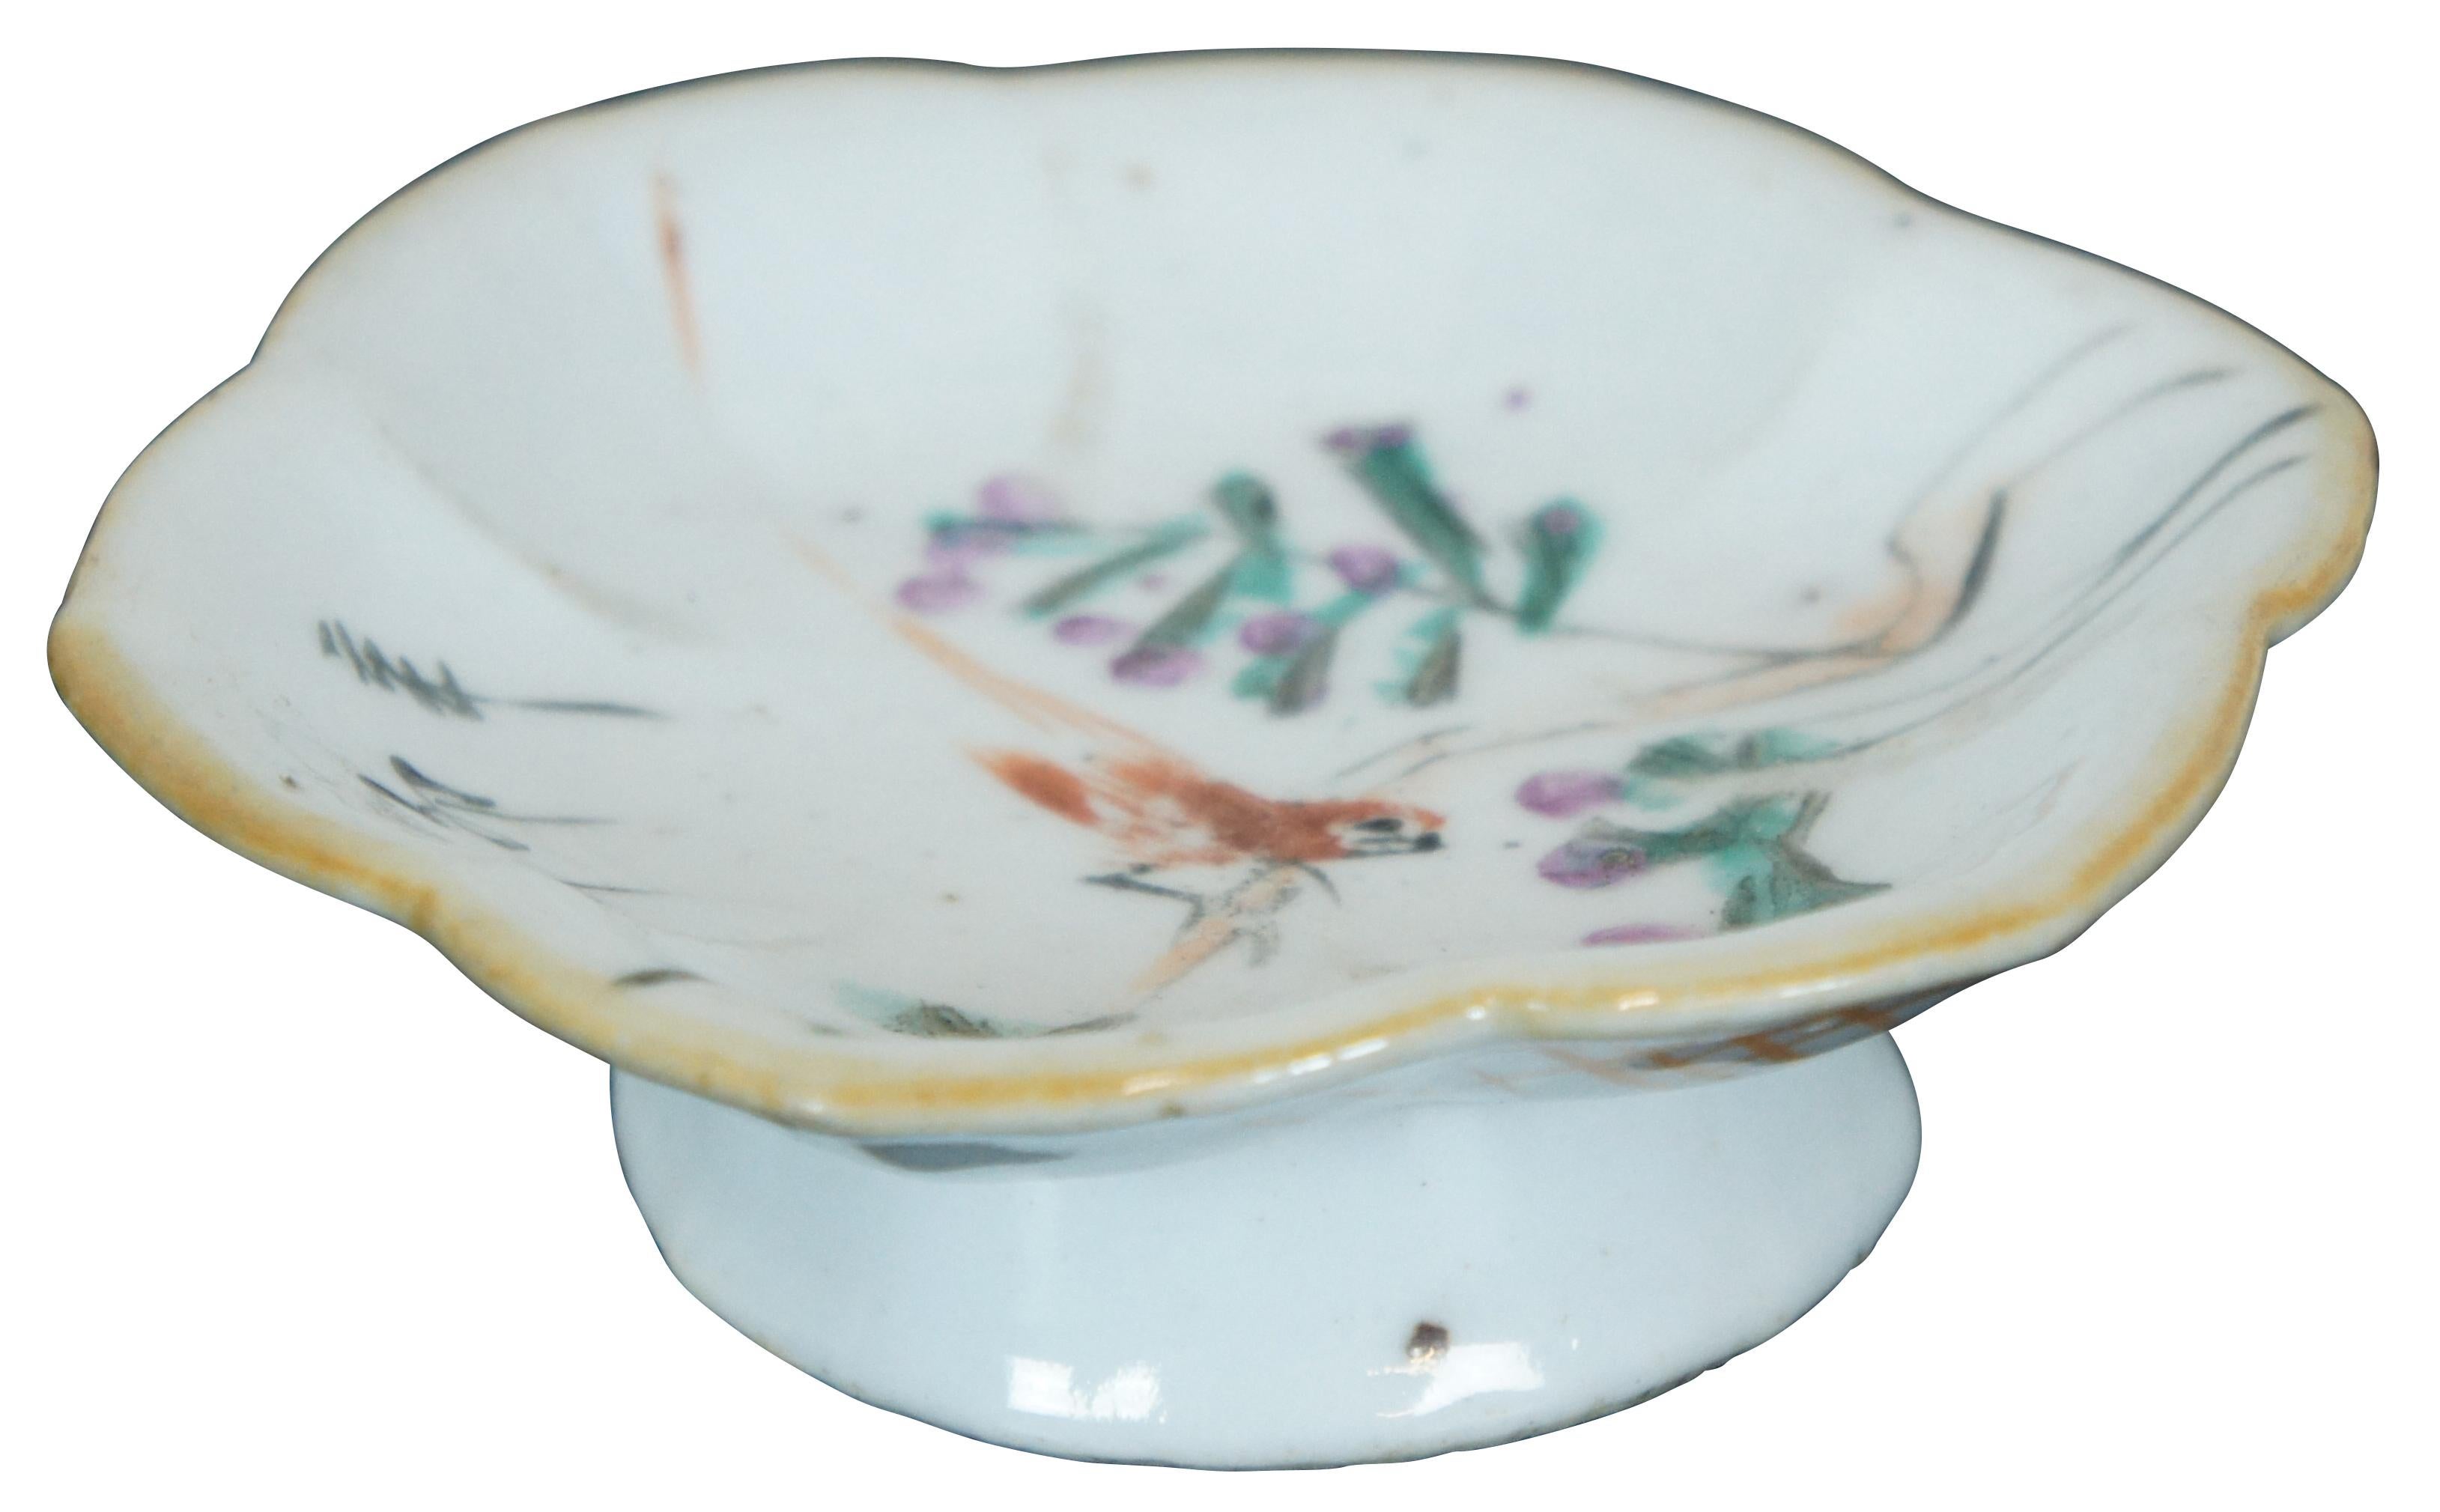 Antique late 19th – early 20th century Chinese export footed porcelain dish with a lotus flower shape, painted with a bird perched on flowering branches.